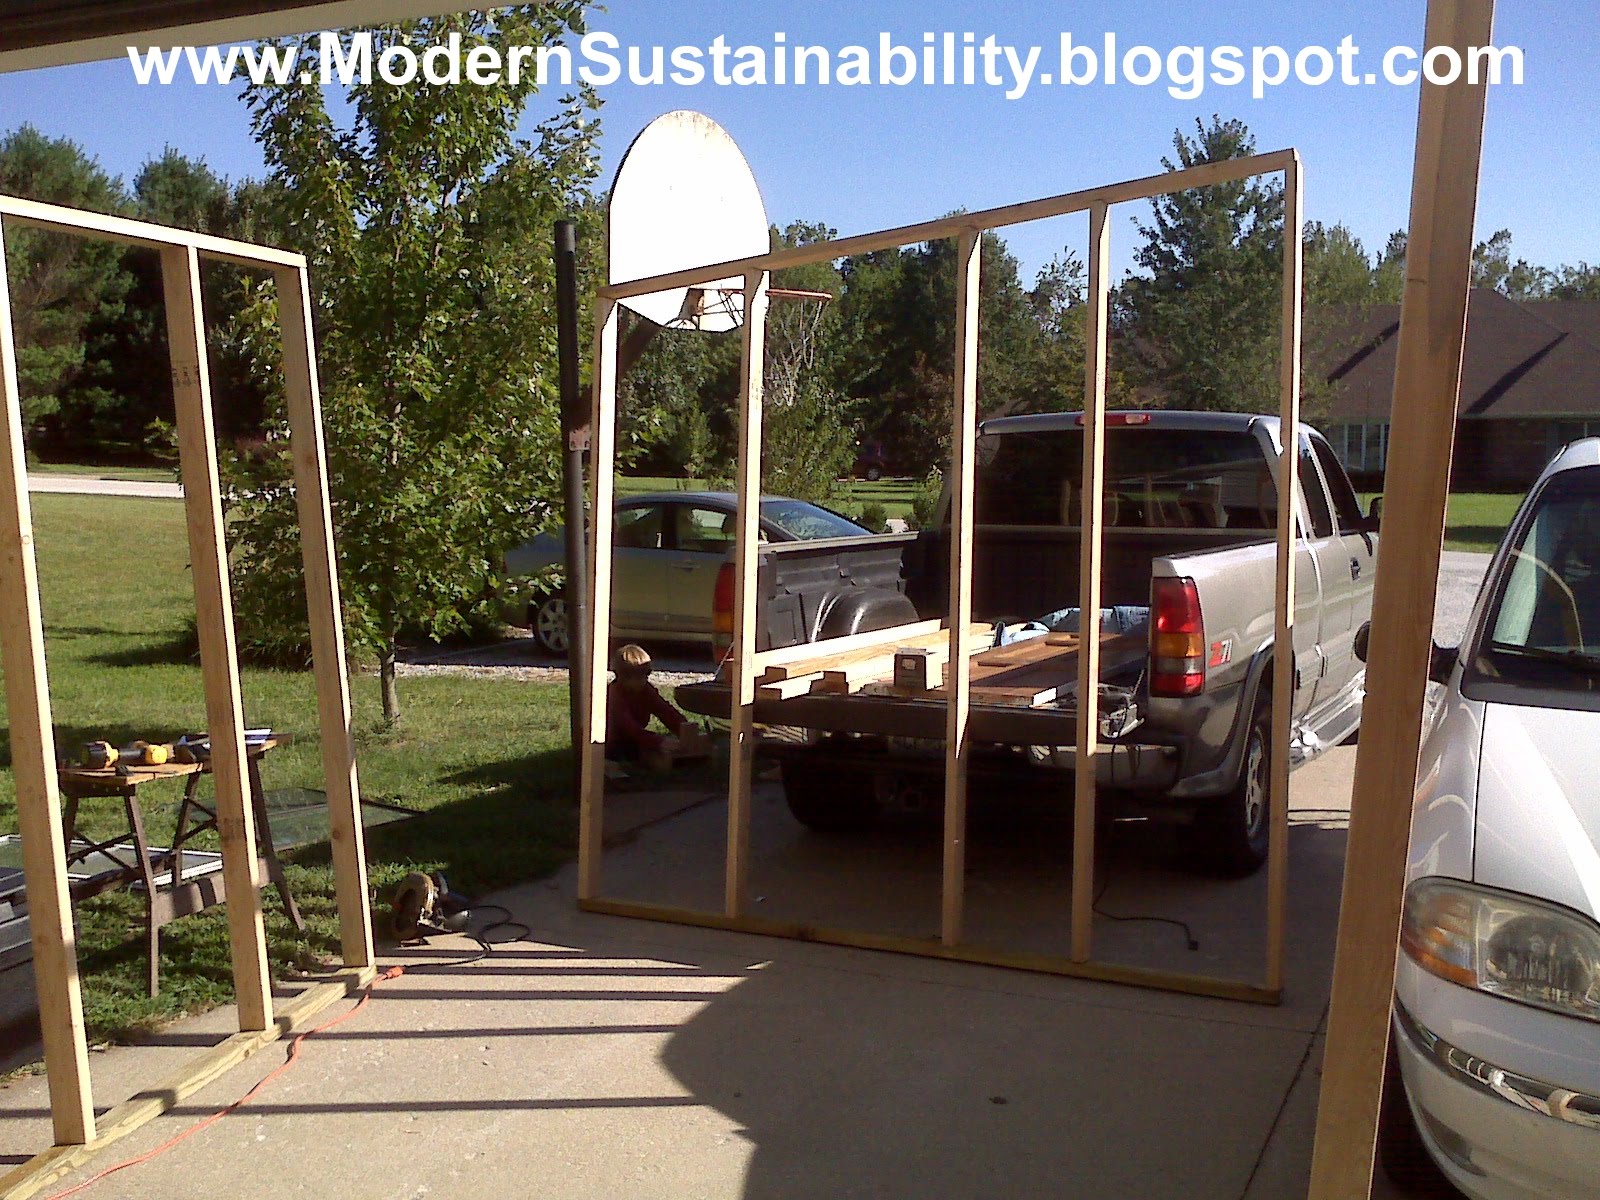 Modern Sustainabilityold-fashioned methods: How to 